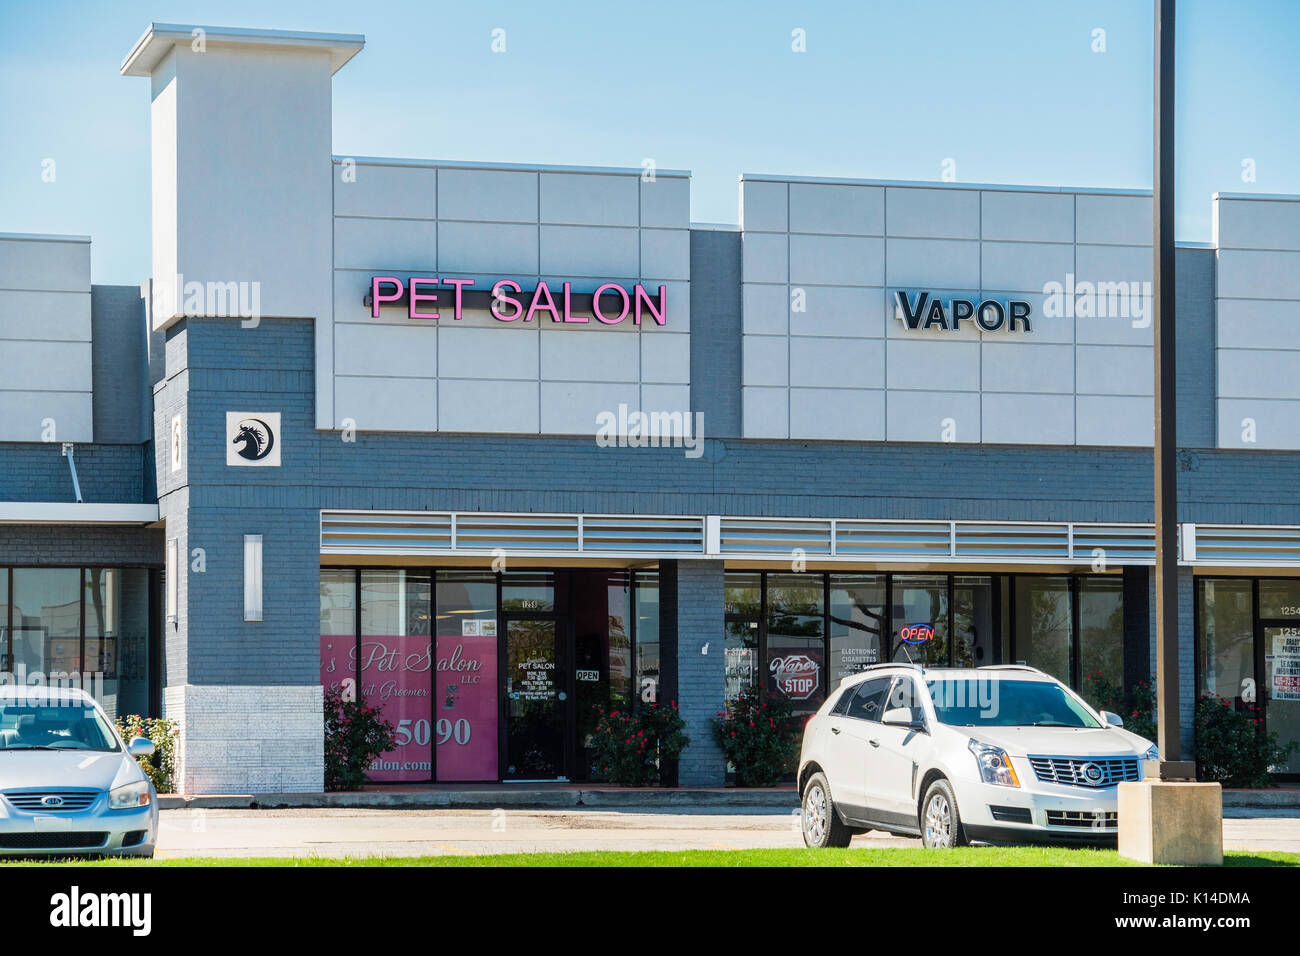 Exterior storefronts of a Pet Salon and a Vapor shop in a strip mall in Norman, Oklahoma, USA. Stock Photo